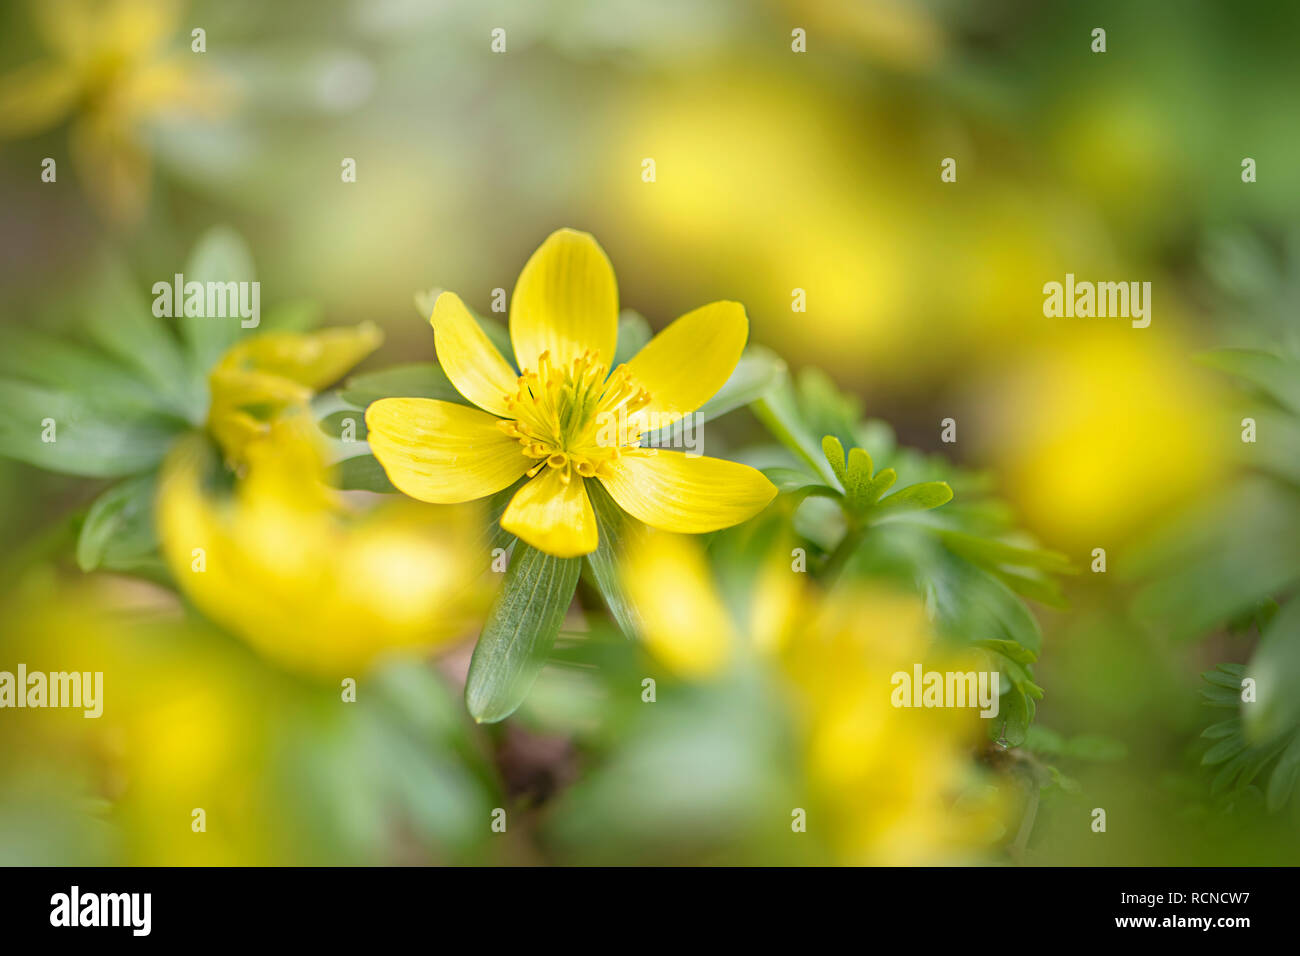 Close-up image of the beautiful spring flowering, yellow Winter aconite also known as Eranthis hyemalis Stock Photo